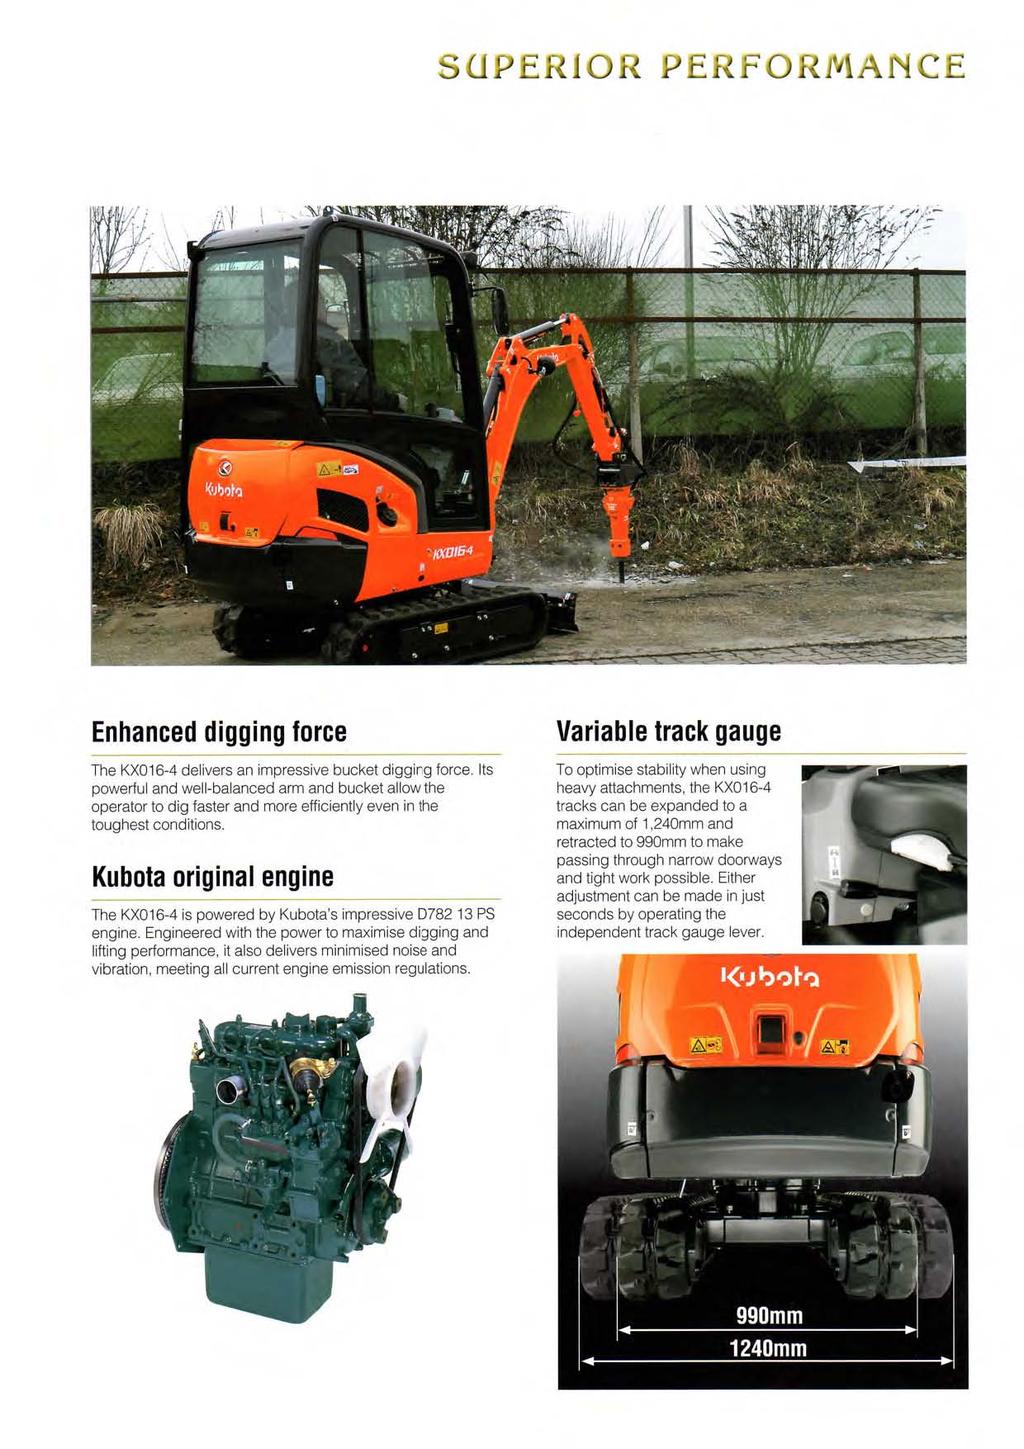 SUPERIOR PERFORJ'llANCE Enhanced digging force The KXO 1&4 delivers an impressive bucket diggirg force Its powerful and well-balanced arm and bucket allow the operator to dig faster and more